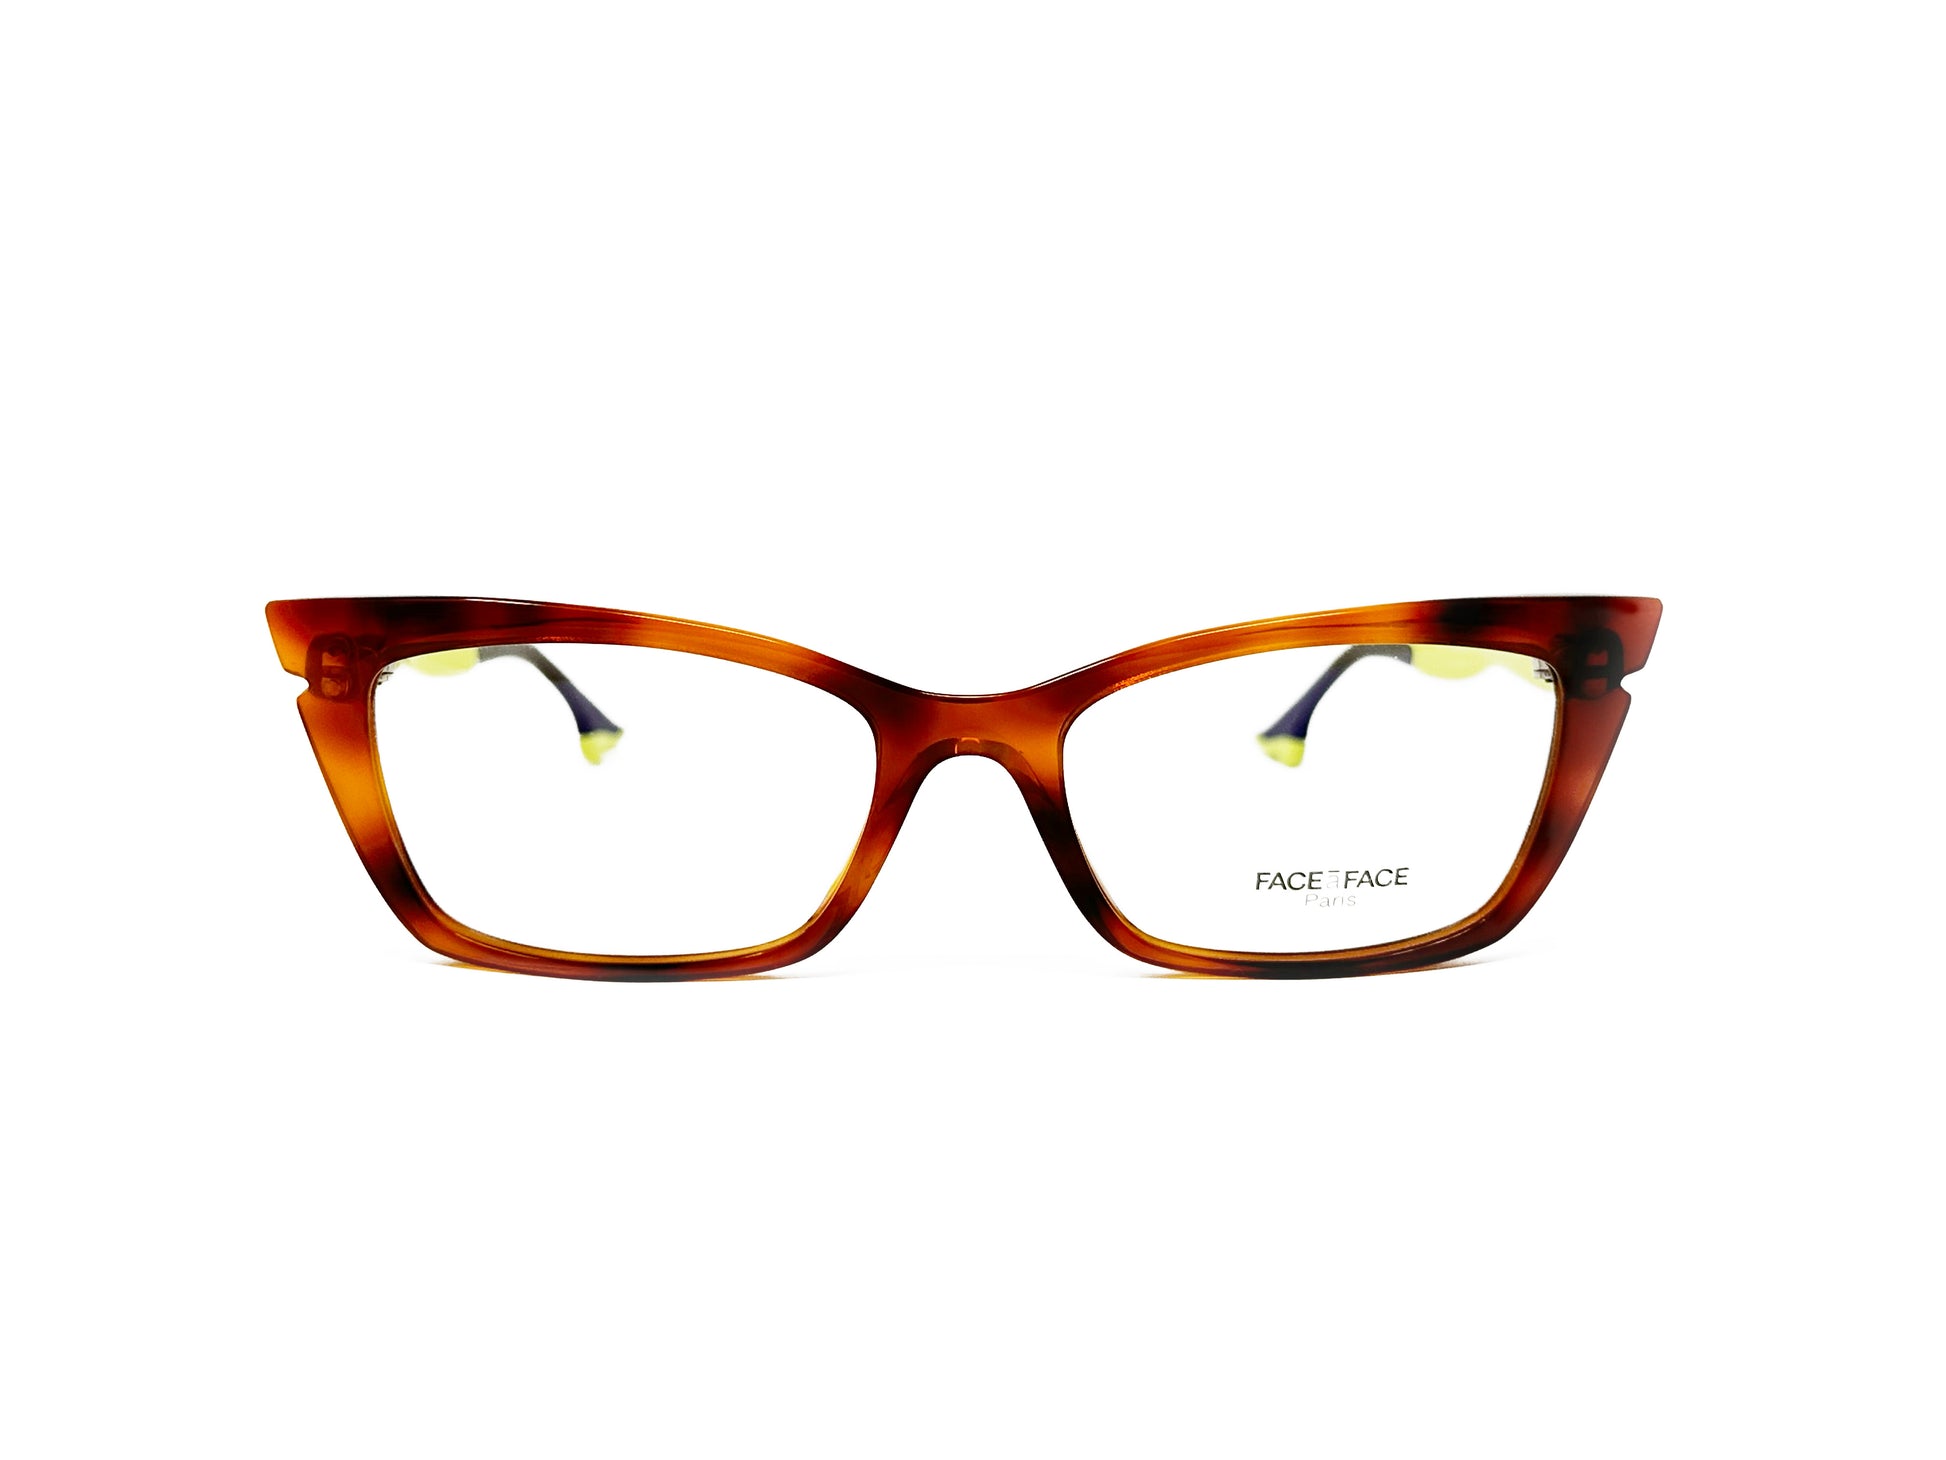 Face a Face rectangular, cat-eye, acetate optical frame with temples that look like legs wearing heels. Model: Sixties 2. Color: 053 - Tortoise with neon yellow legs. Front view. 